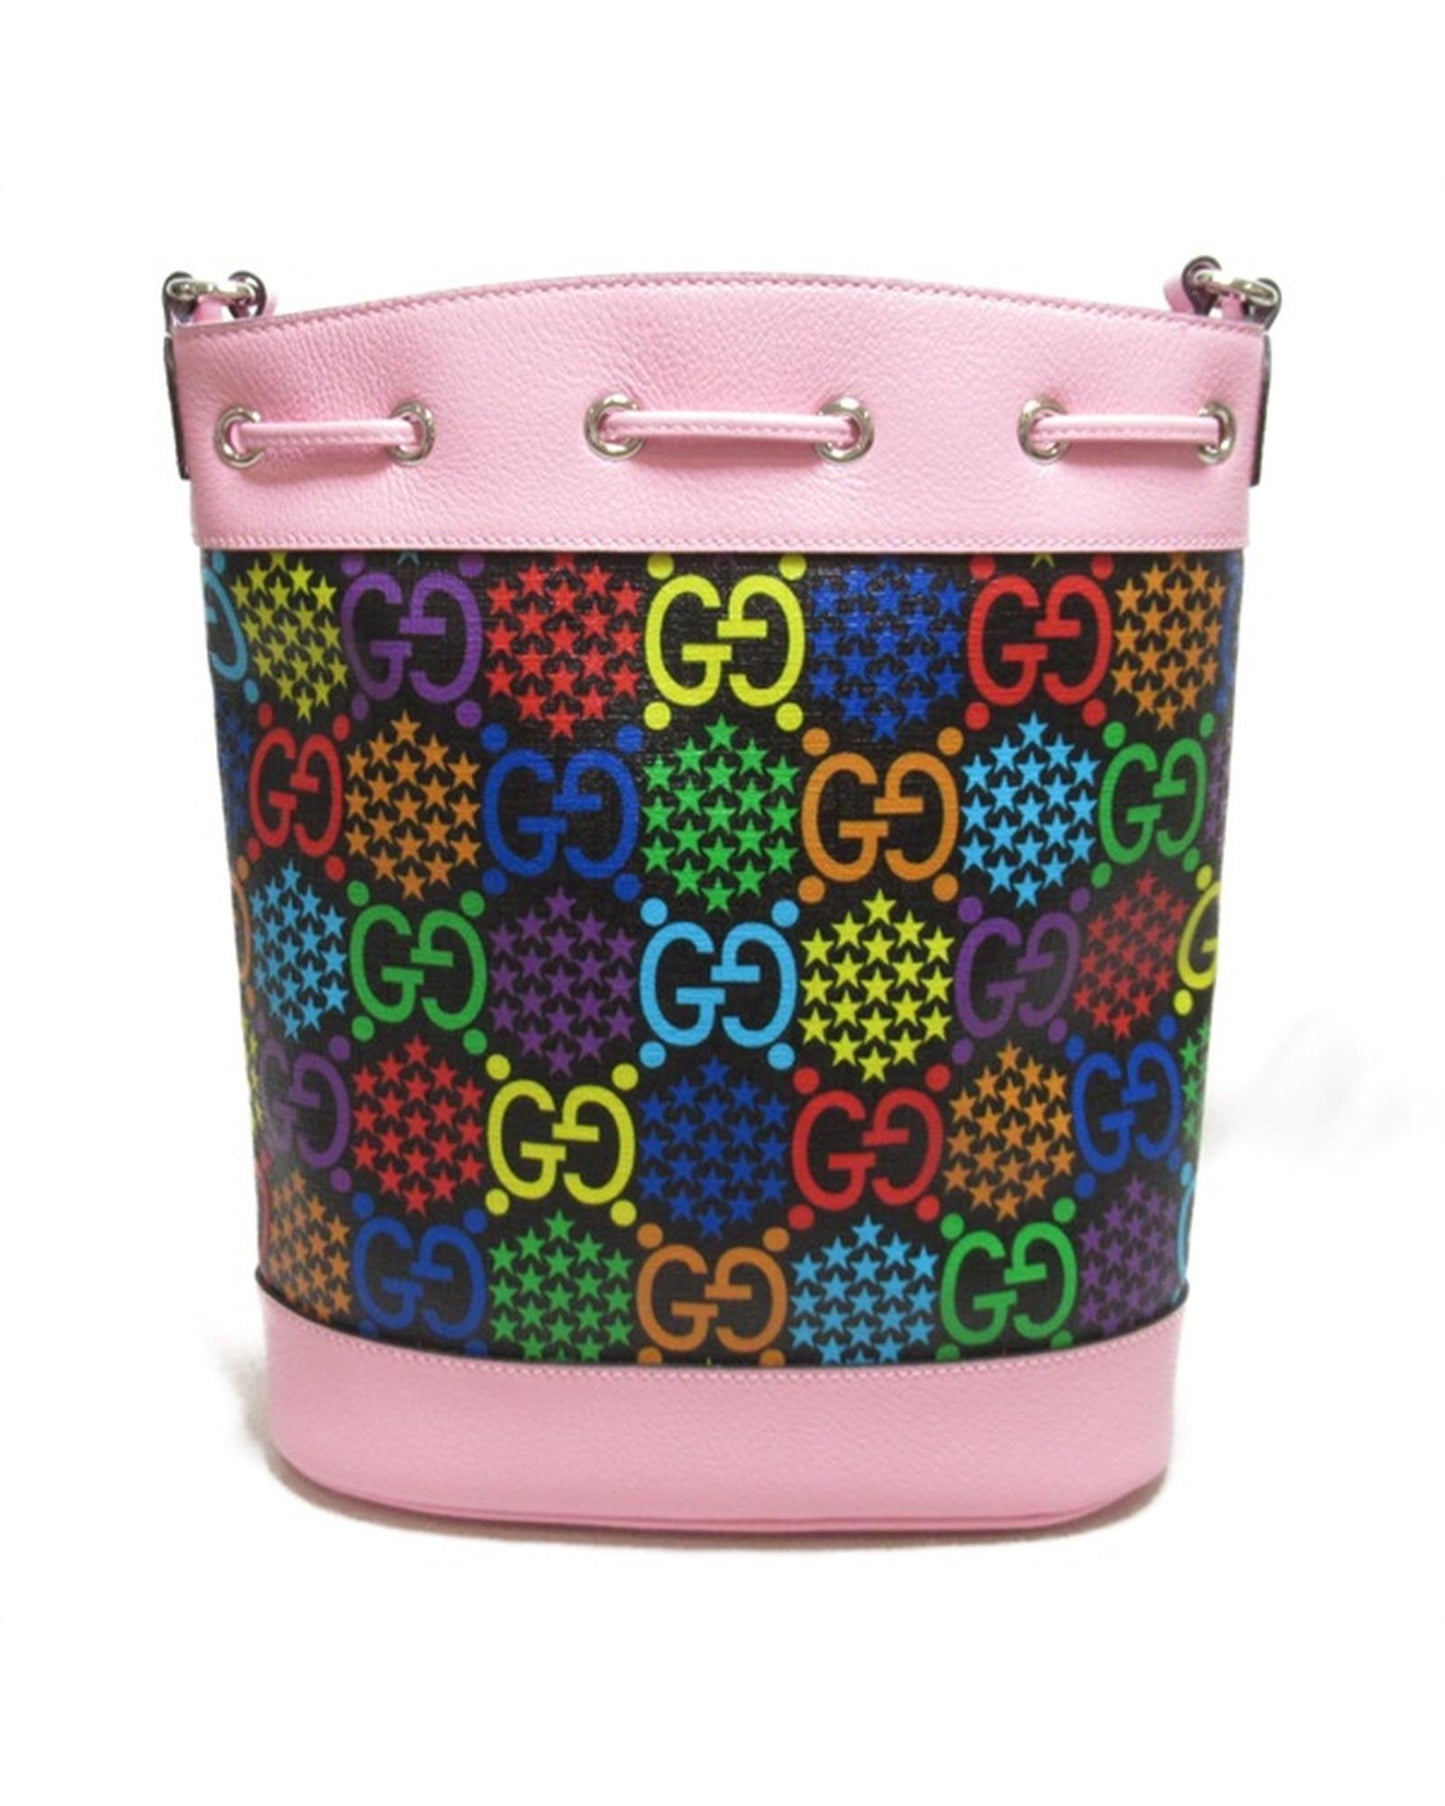 Gucci Women's Psychedelic Bucket Bag in Print in Pink